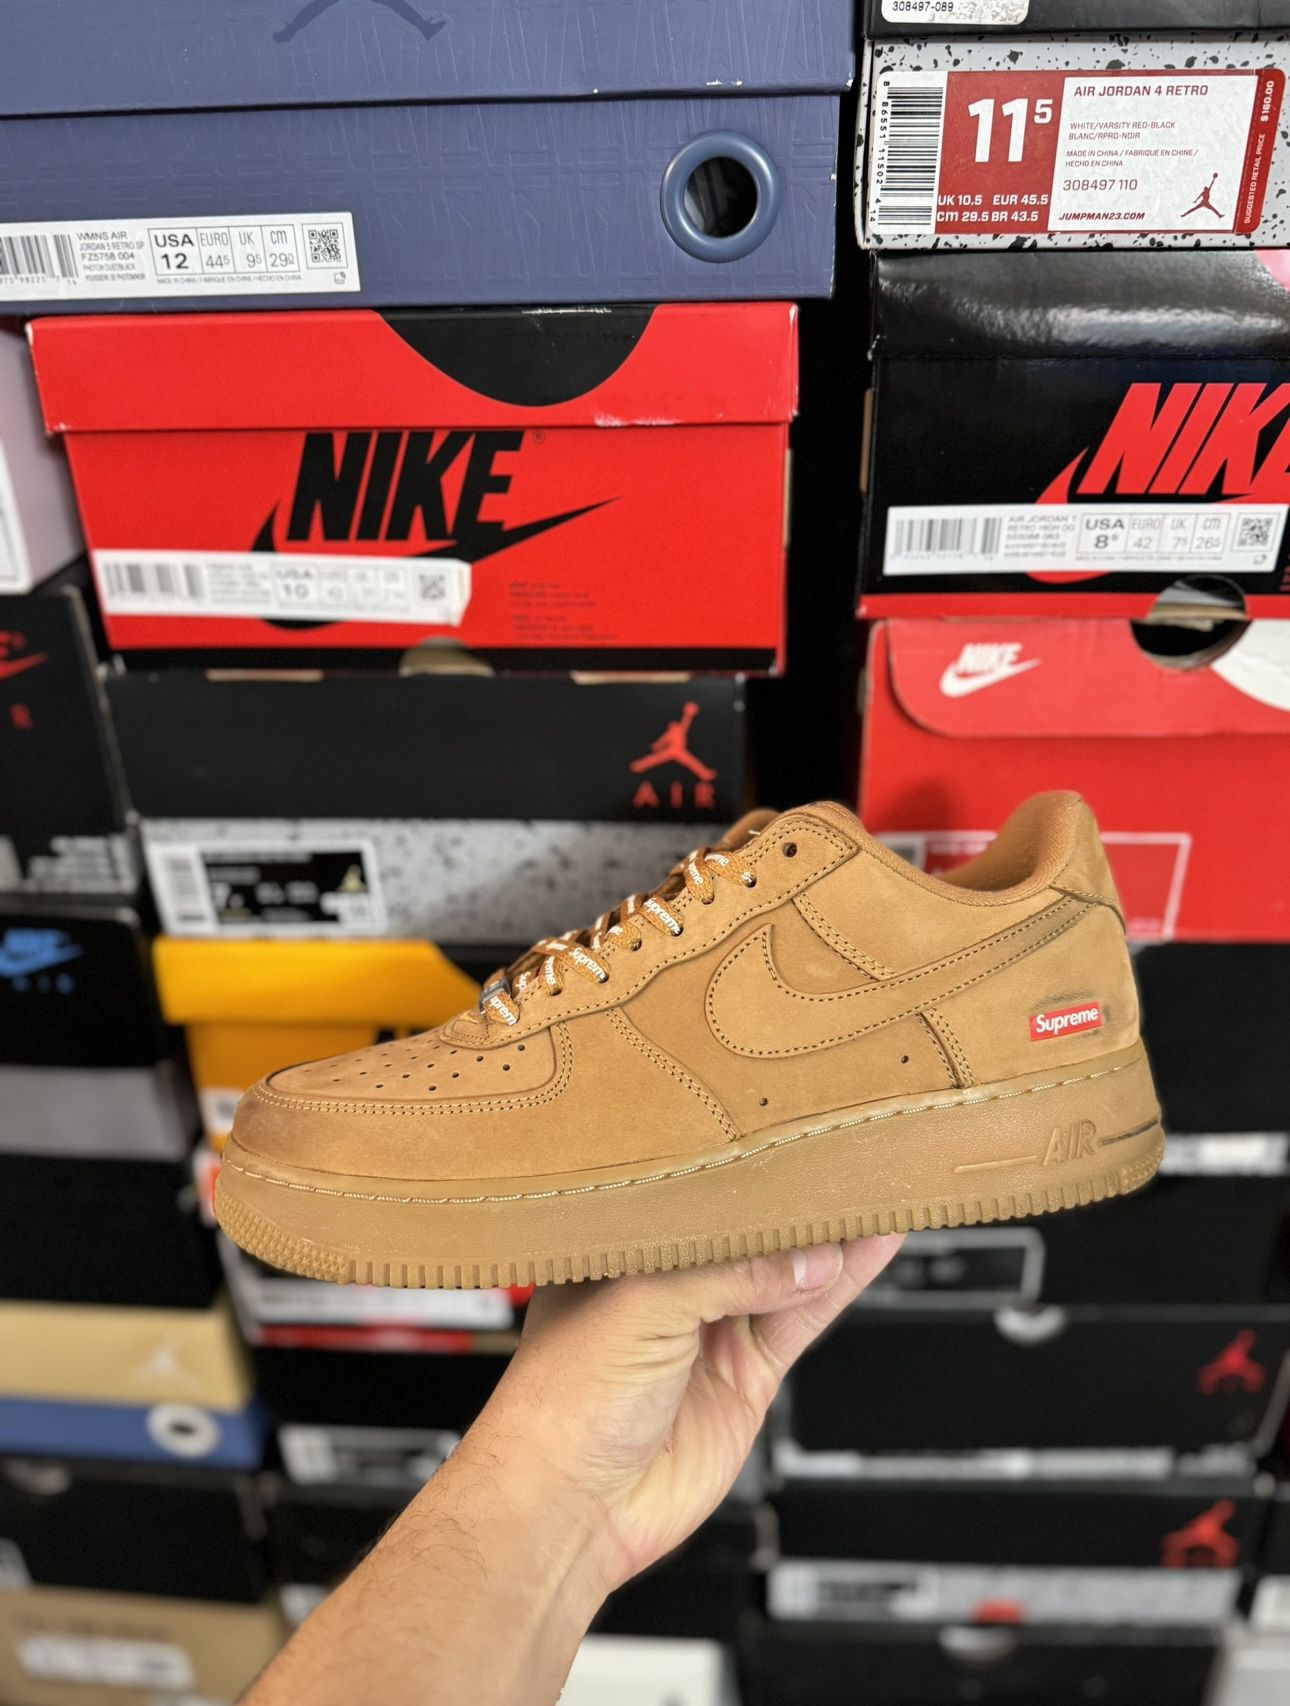 Nike Air Force 1 Low Supreme Wheat size 9  Close To VNDS 